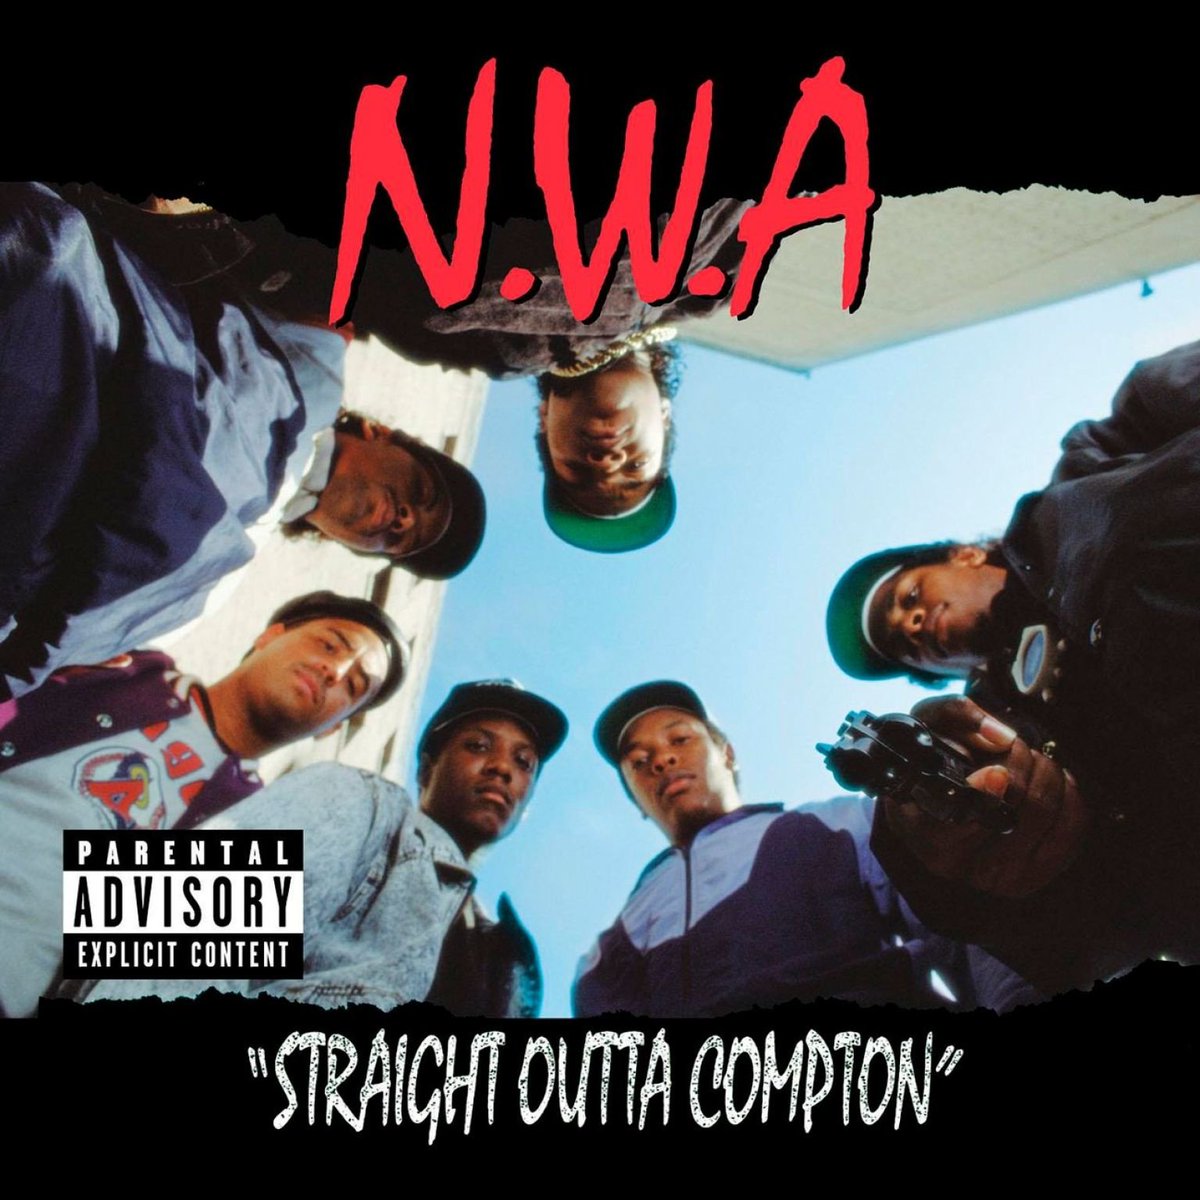 Today in 1988, history was made.  #StraightOuttaCompton https://t.co/bCRYNDc6y3